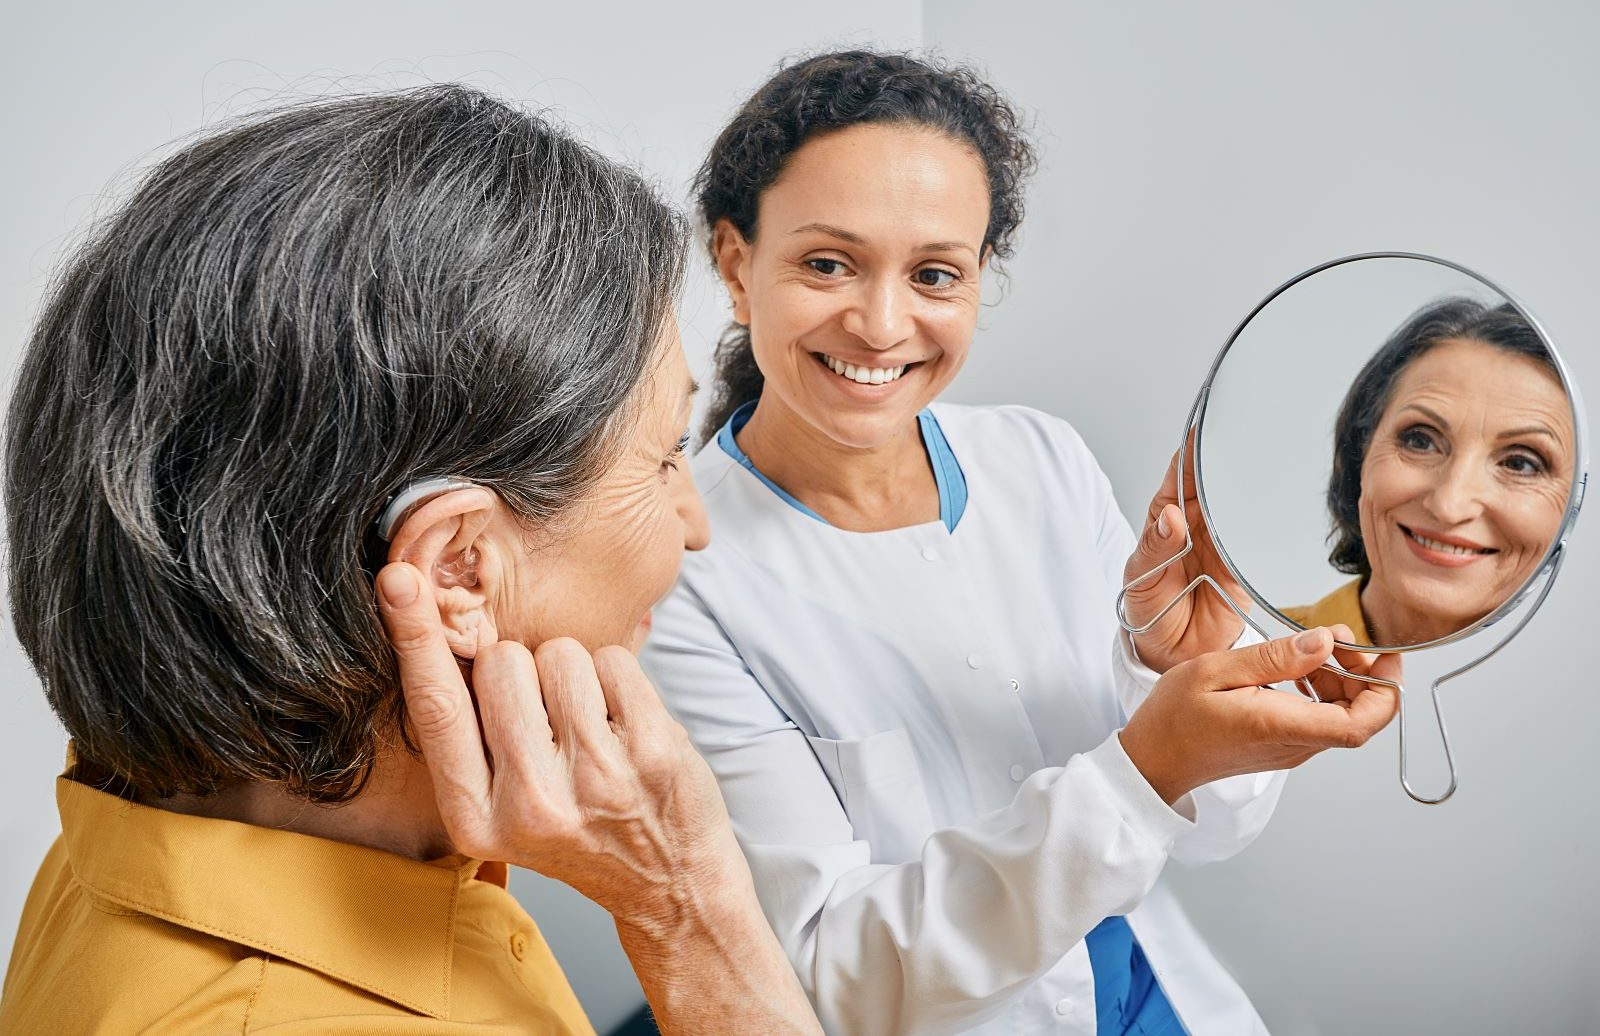 A doctor helps a patient with her hearing aids.